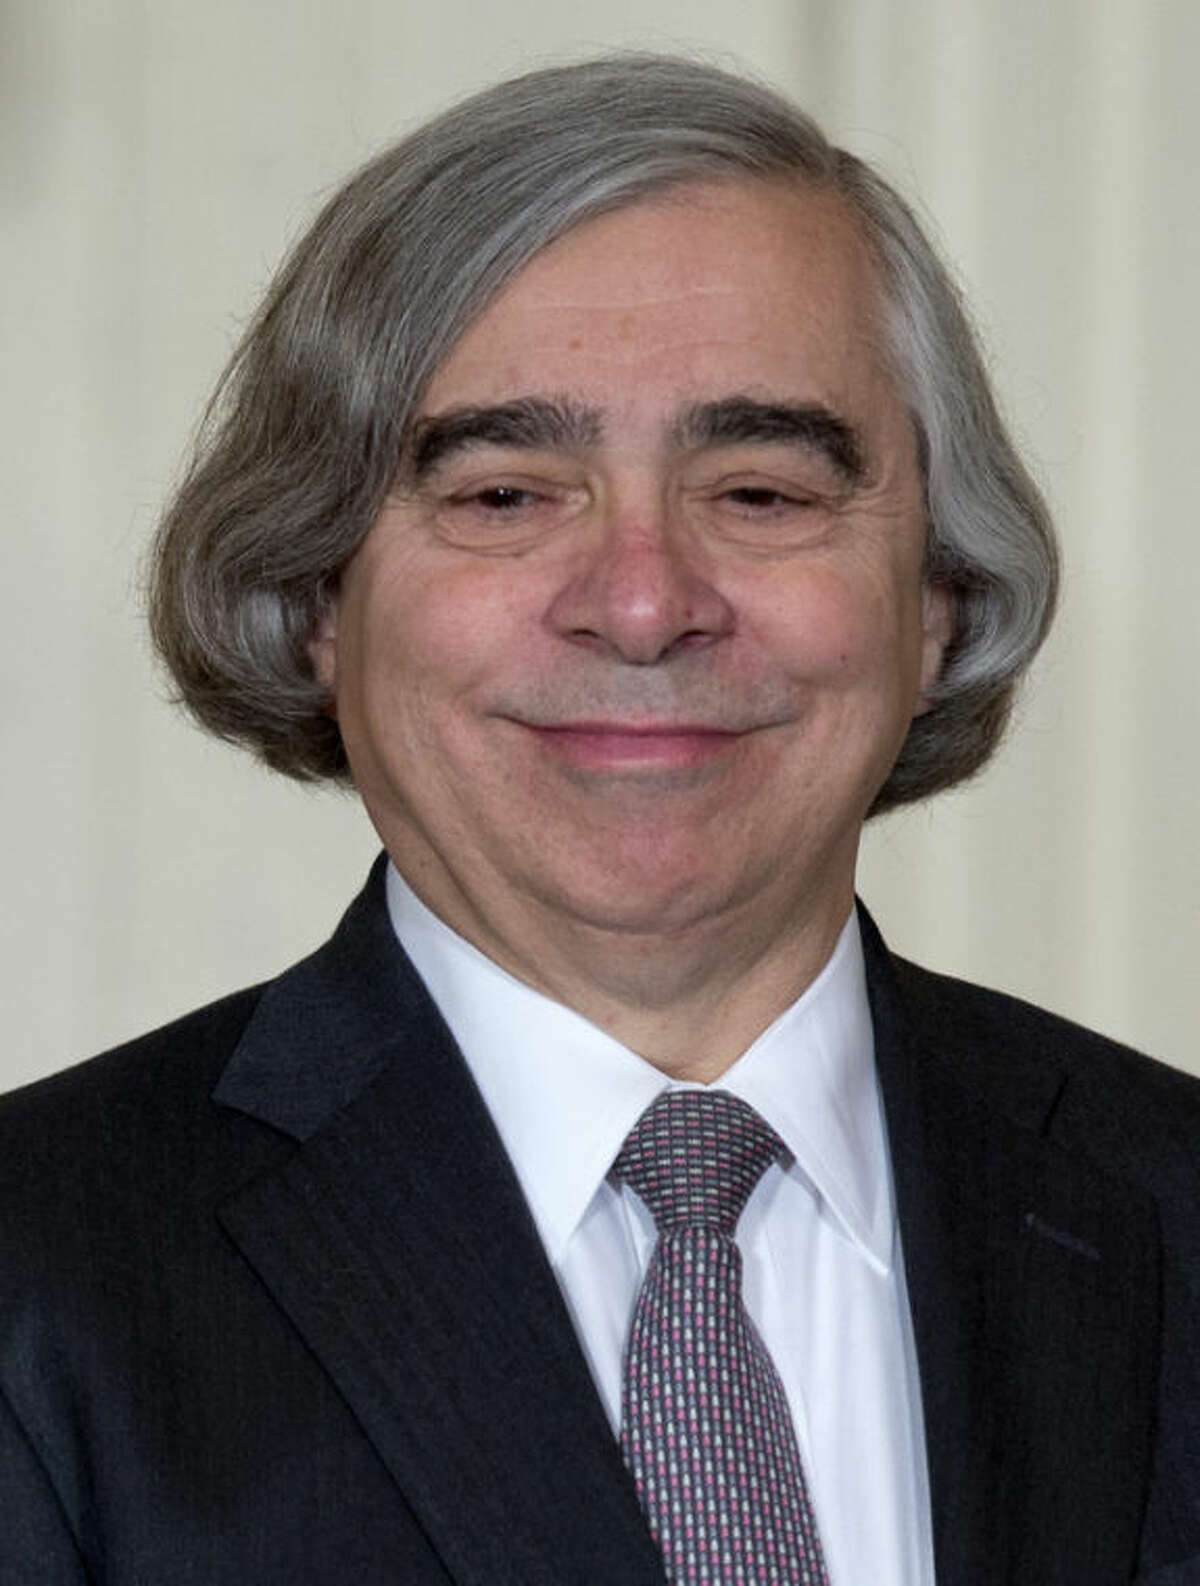 MIT physics professor Ernest Moniz smiles as he stands on stage in the East Room of the White House in Washington, Monday, March 4, 2013, where President Barack Obama announces he would nominate Moniz for Energy Secretary . (AP Photo/Carolyn Kaster)